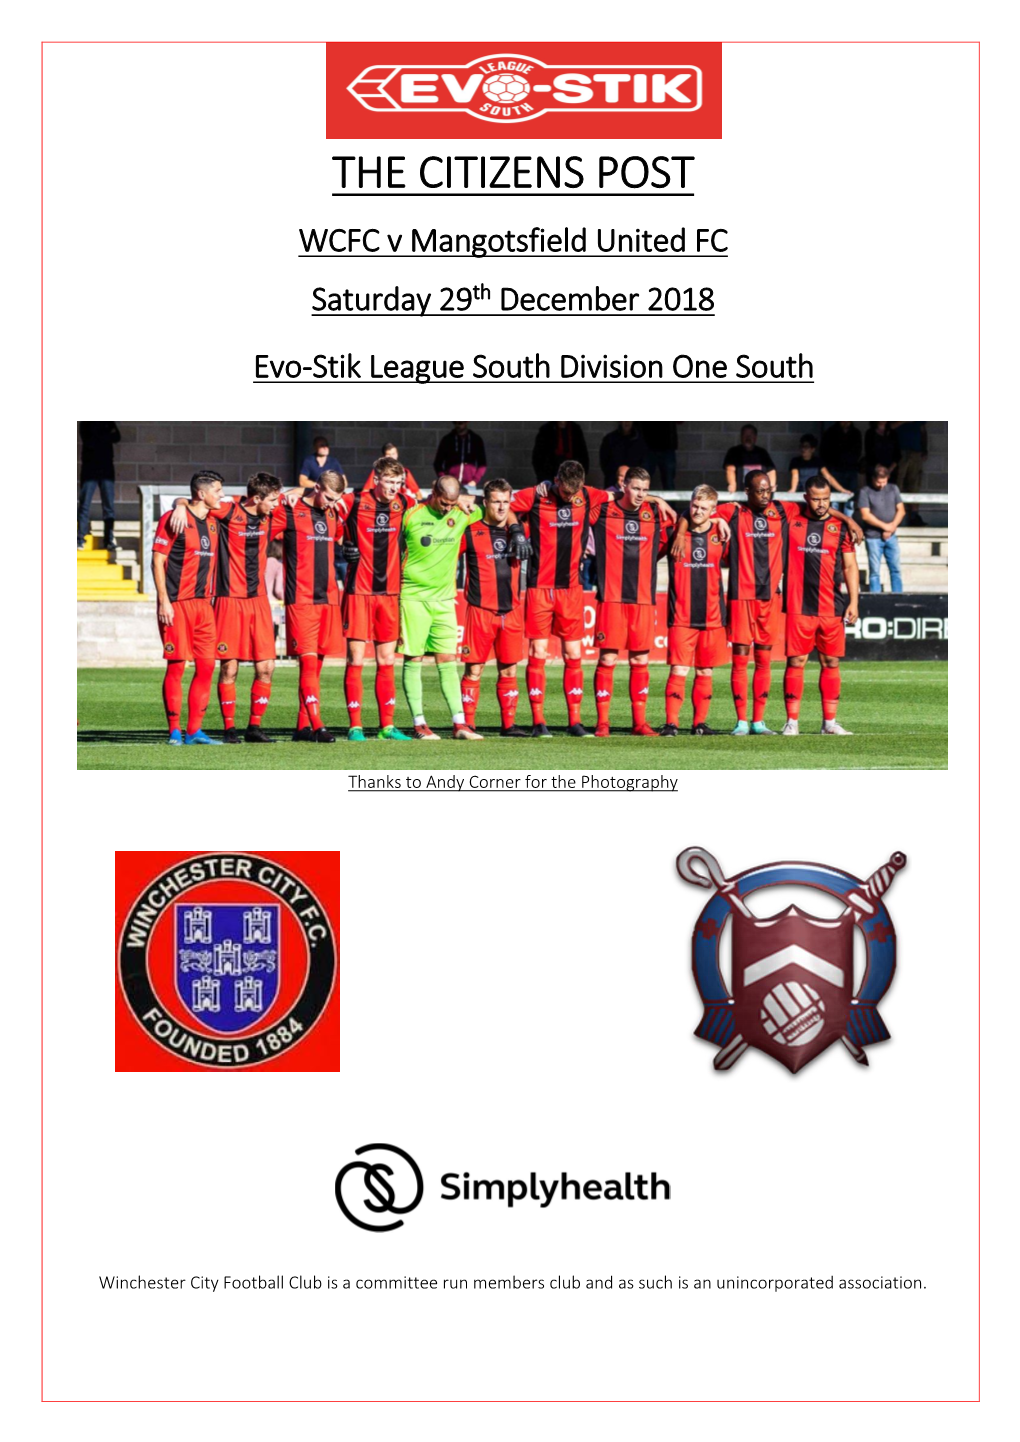 THE CITIZENS POST WCFC V Mangotsfield United FC Saturday 29Th December 2018 Evo-Stik League South Division One South